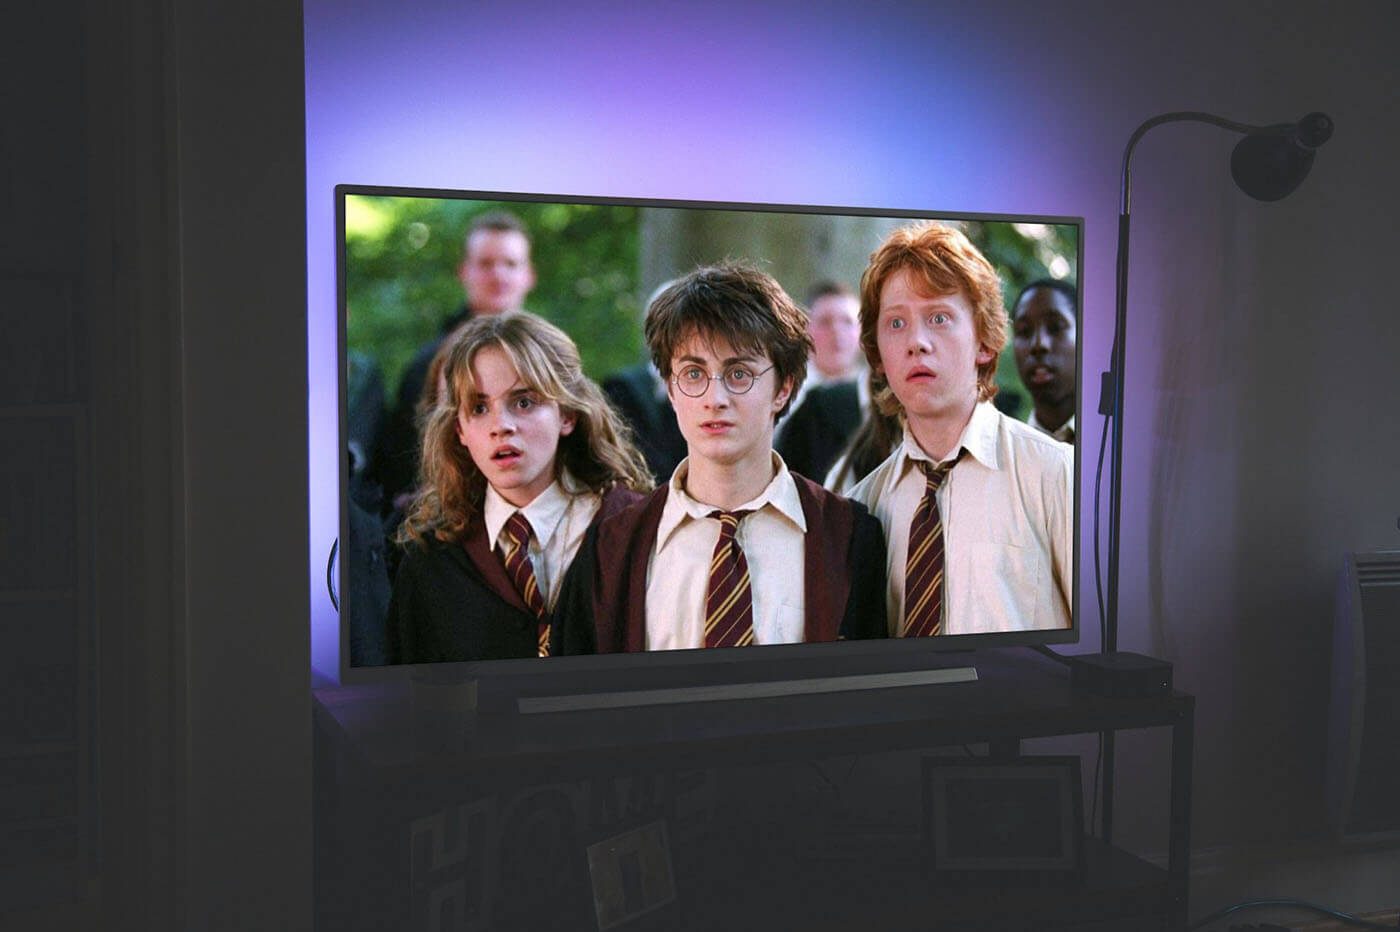 The 'Harry Potter' Films Aren't Coming to Netflix—Here's Where to Watch